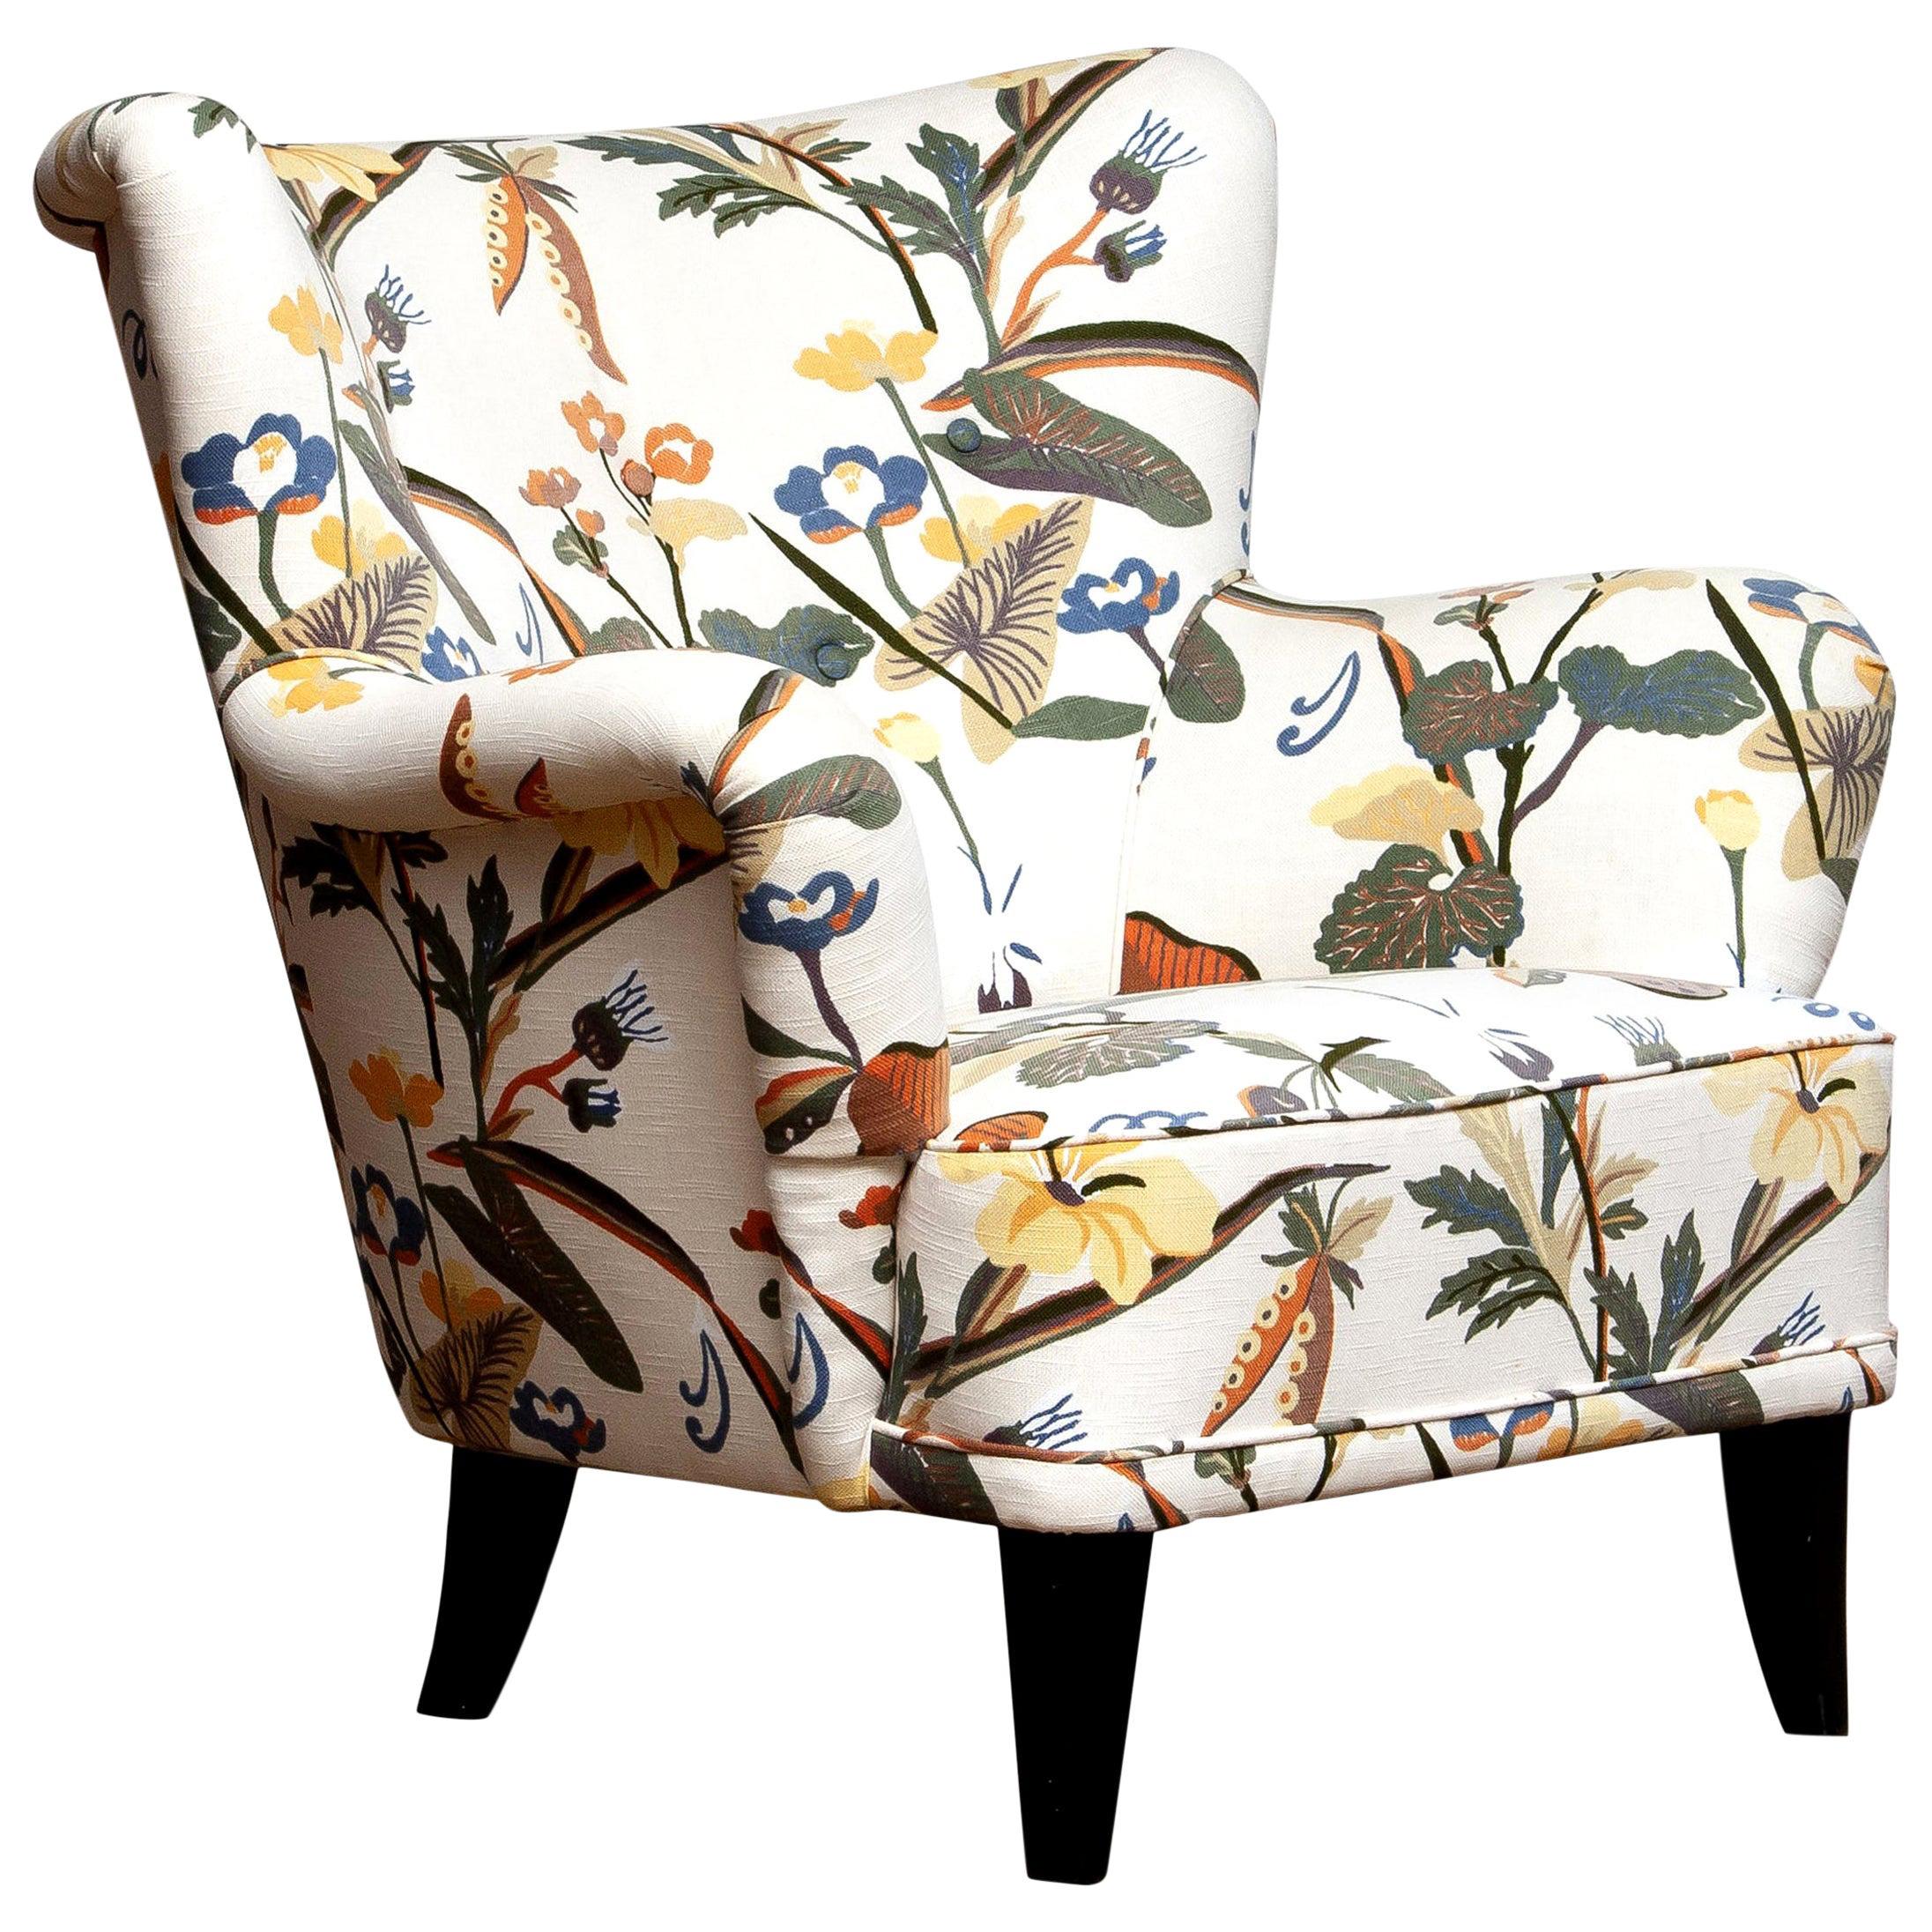 Extremely beautiful 1940s-1950s arm / lounge / club chair upholstered (in a later period) with the typical floral print fabric designed by Josef Frank.
This chair is designed by Ilmari Lappalainen for Asko, Finland. 